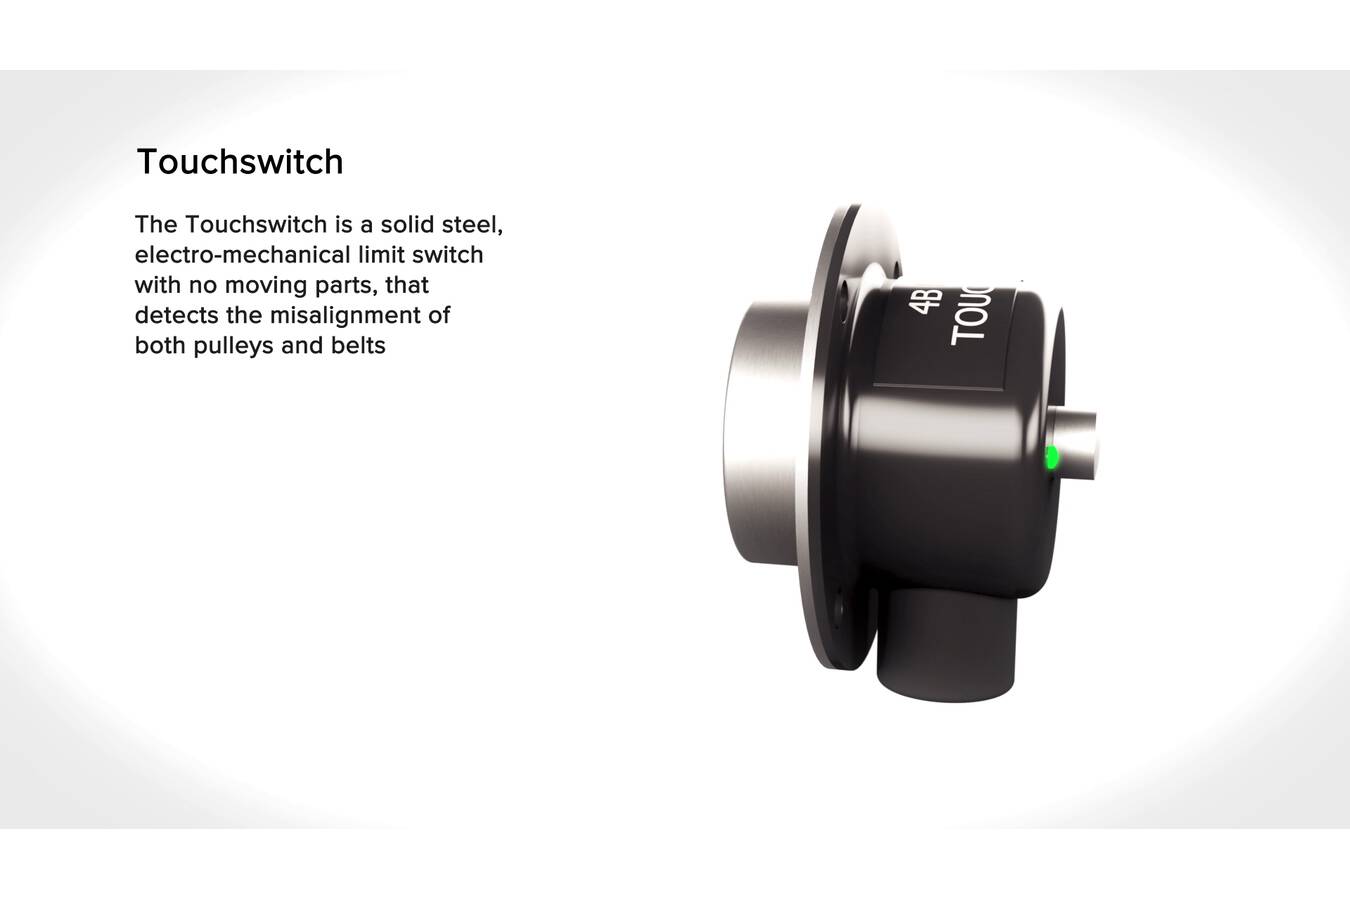 4B TOUCHSWITCH – Belt & Pulley Alignment Sensor The TouchSwitch is a mechanical pressure sensor without moving parts. It functions as a misalignment monitor for conveyors and elevators.